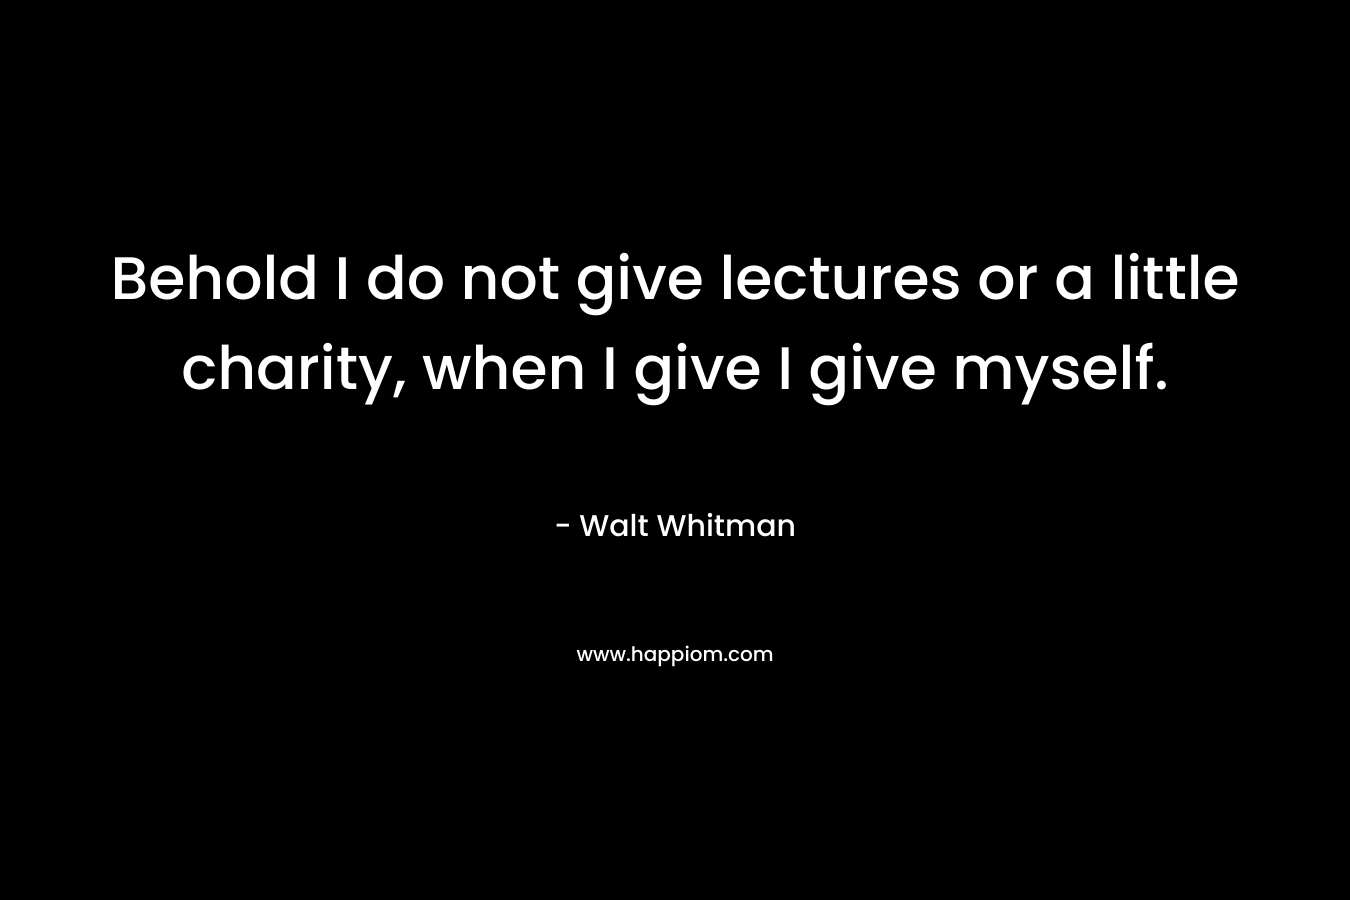 Behold I do not give lectures or a little charity, when I give I give myself. – Walt Whitman